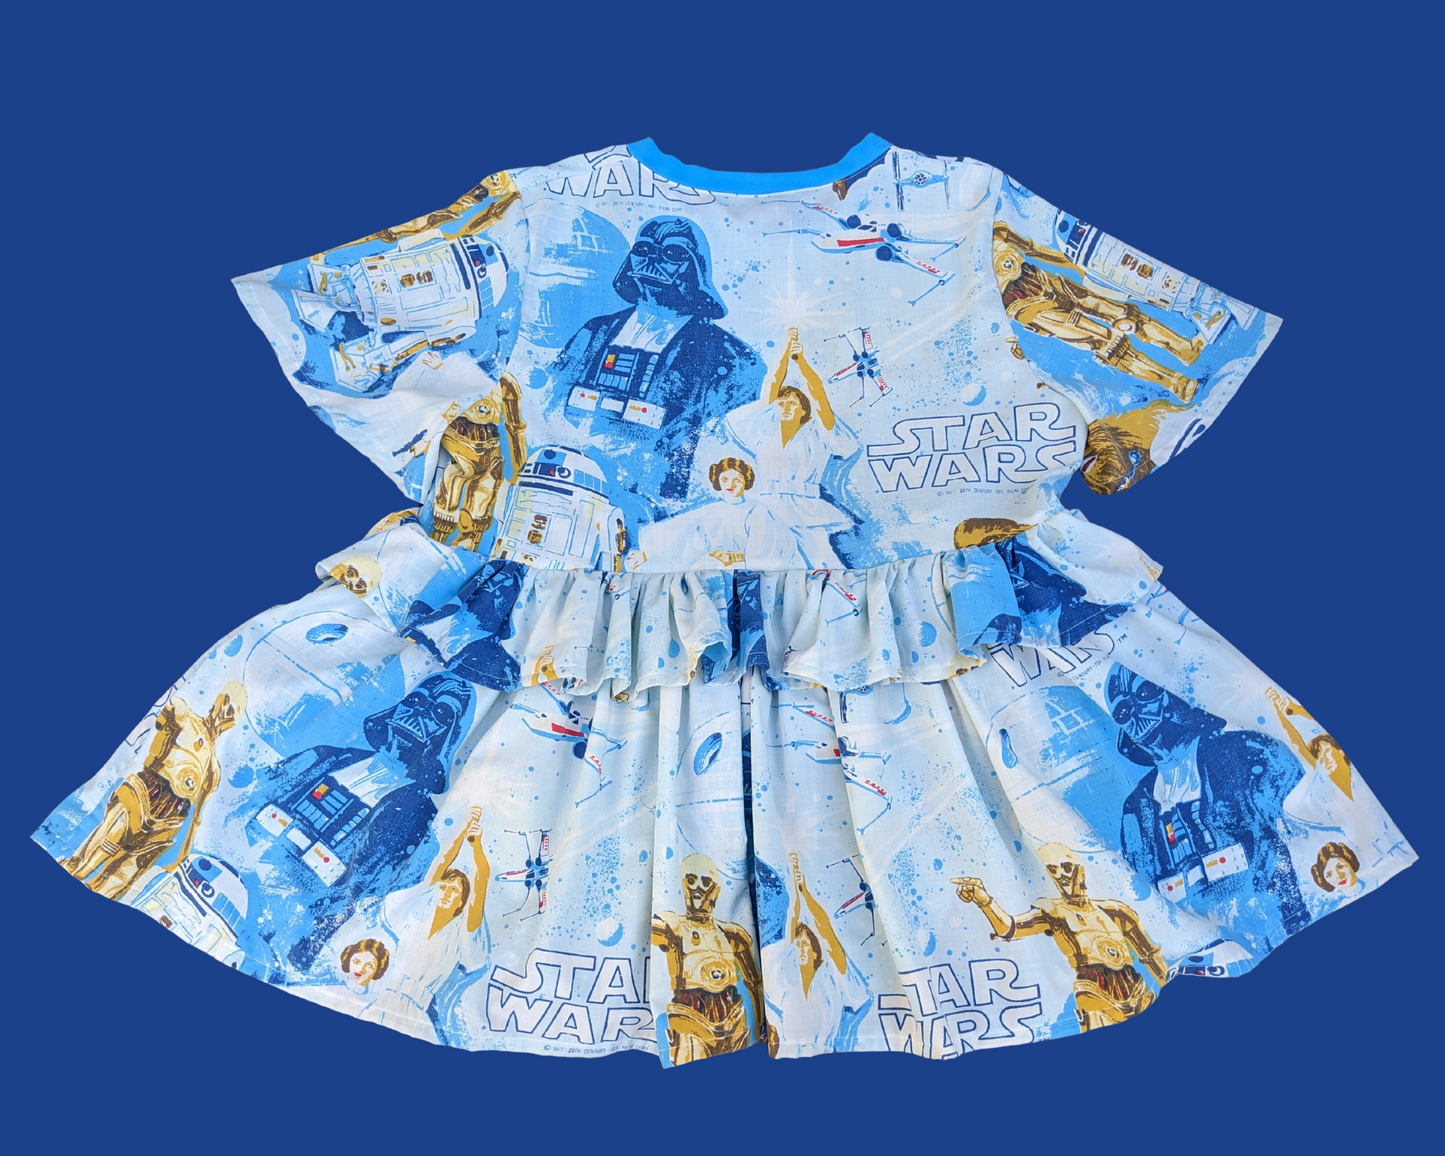 Handmade, Upcycled Vintage 1977 Star Wars, A New Hope Bedsheet Dress with Matching Detachable Collar Size 3XL